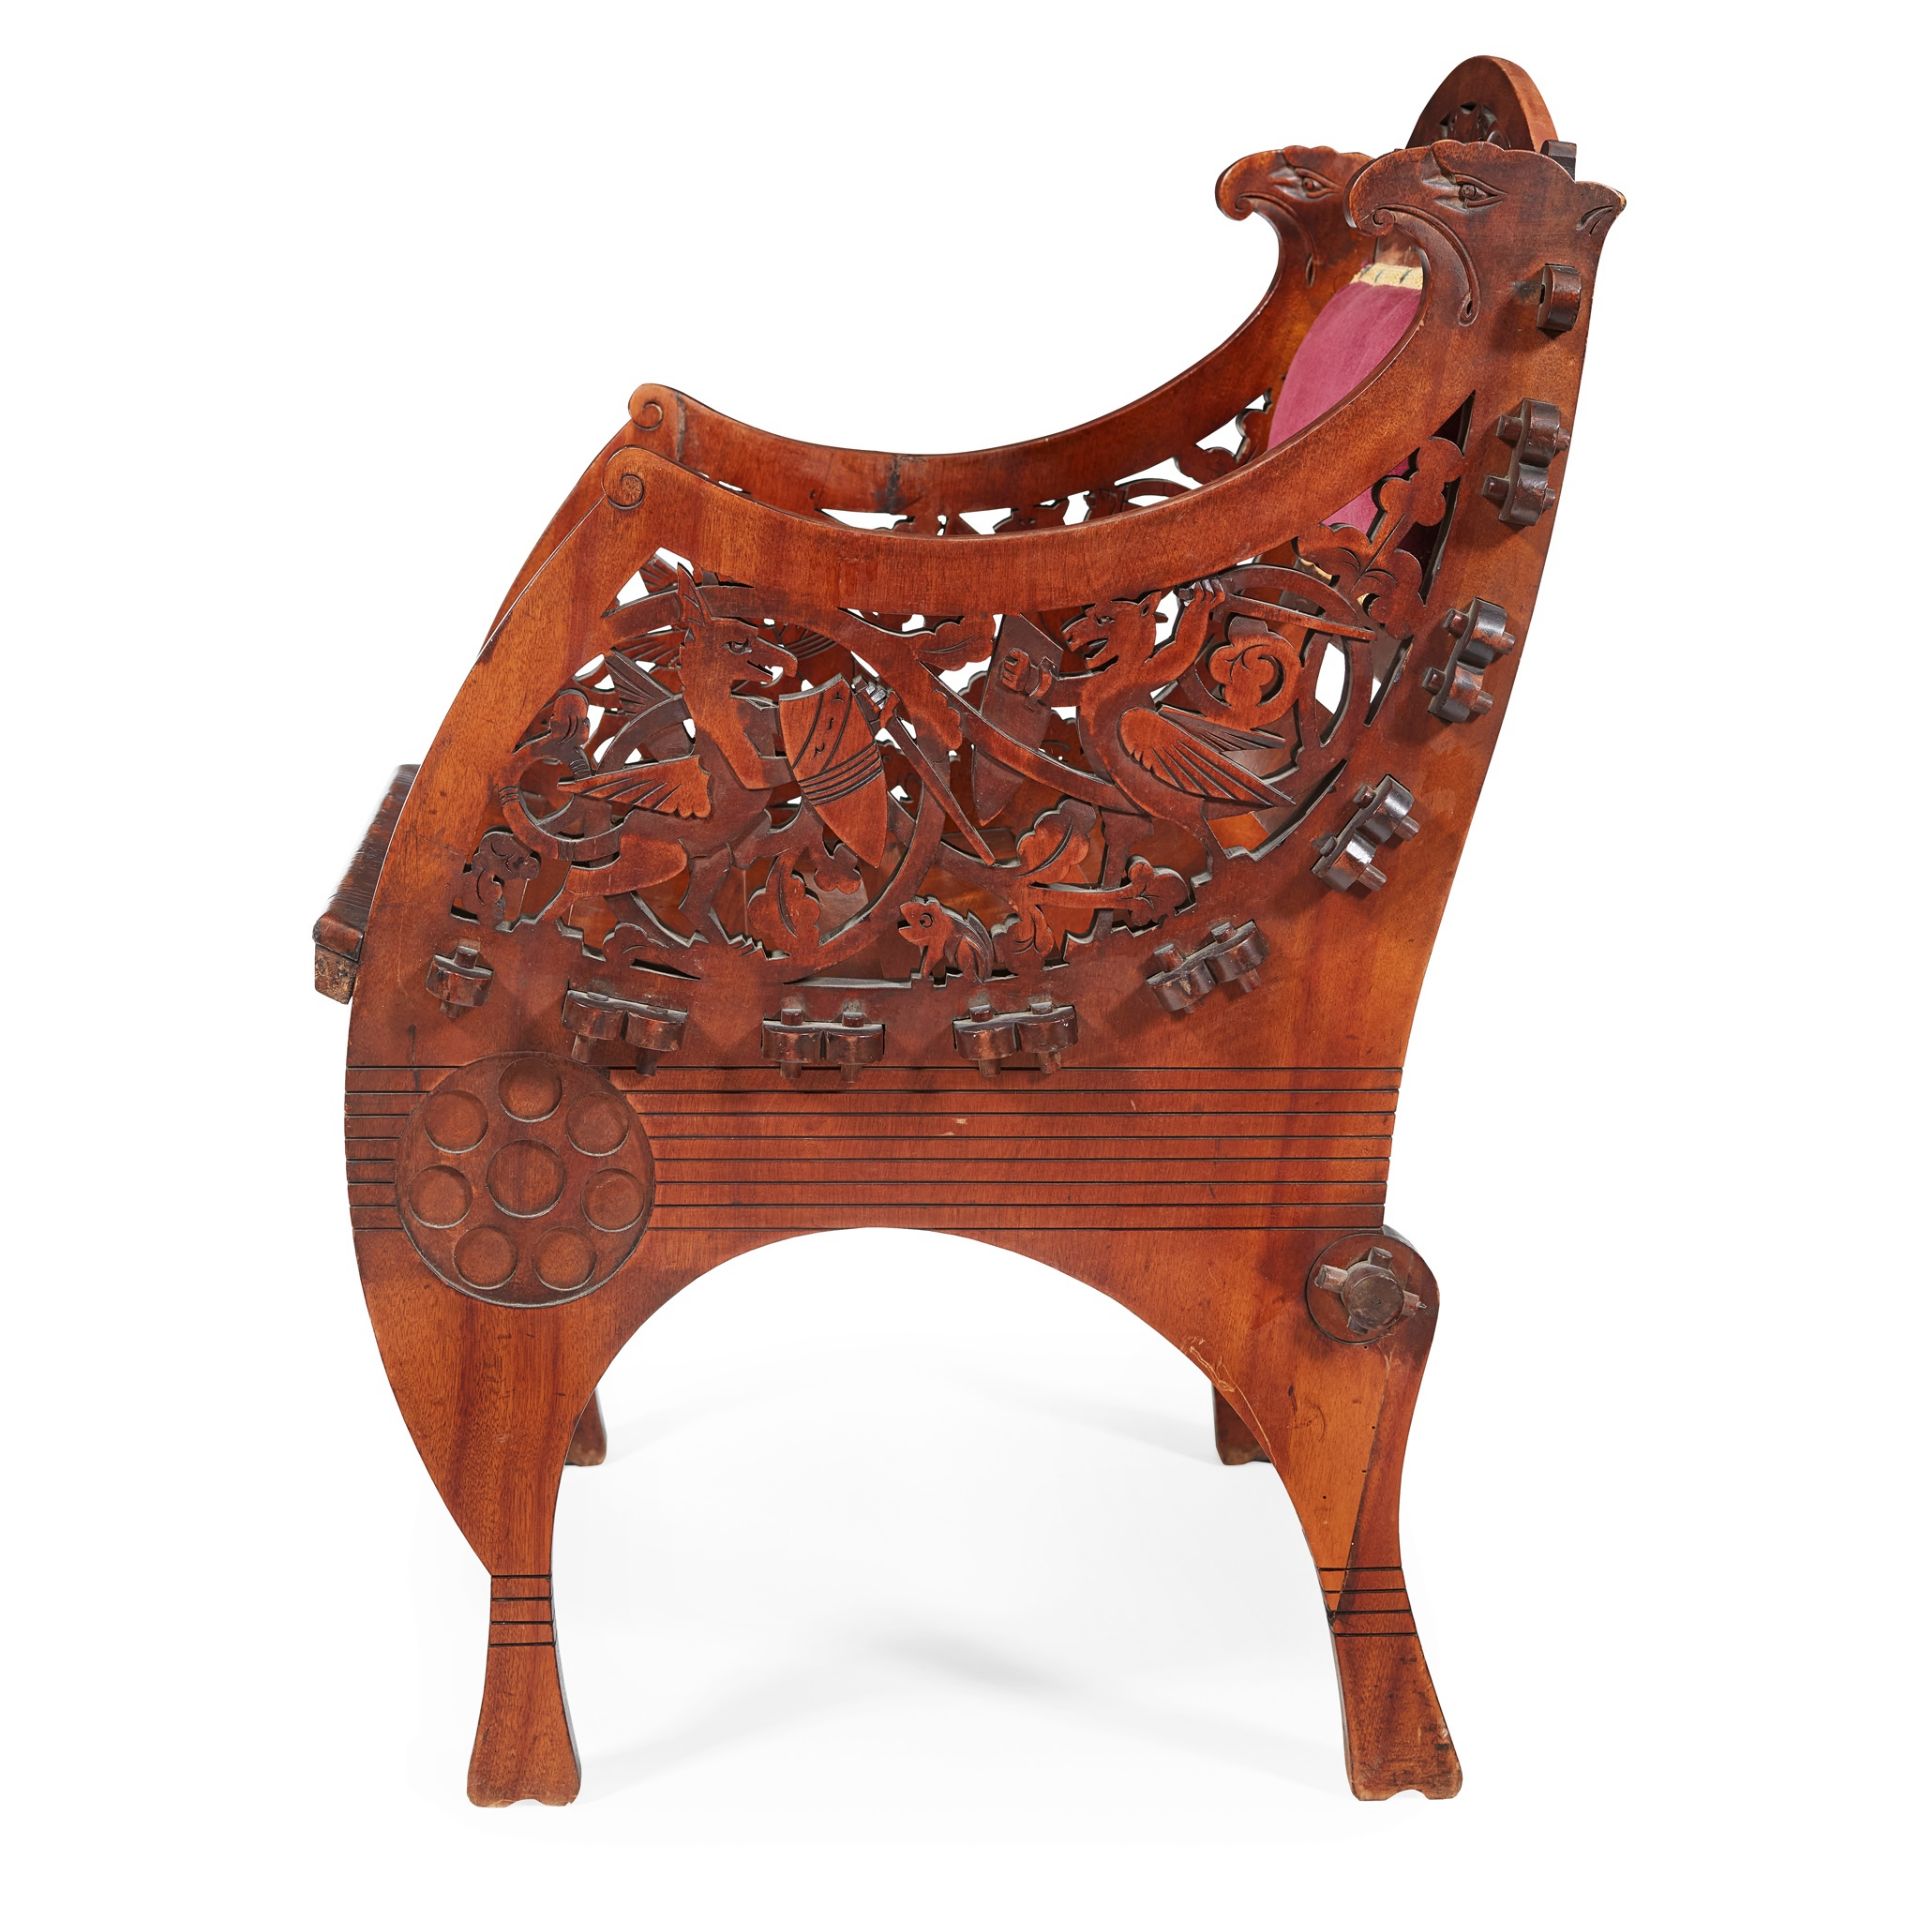 WALFORD & DONKIN, LONDON GOTHIC REVIVAL ARMCHAIR, CIRCA 1870 - Image 2 of 3